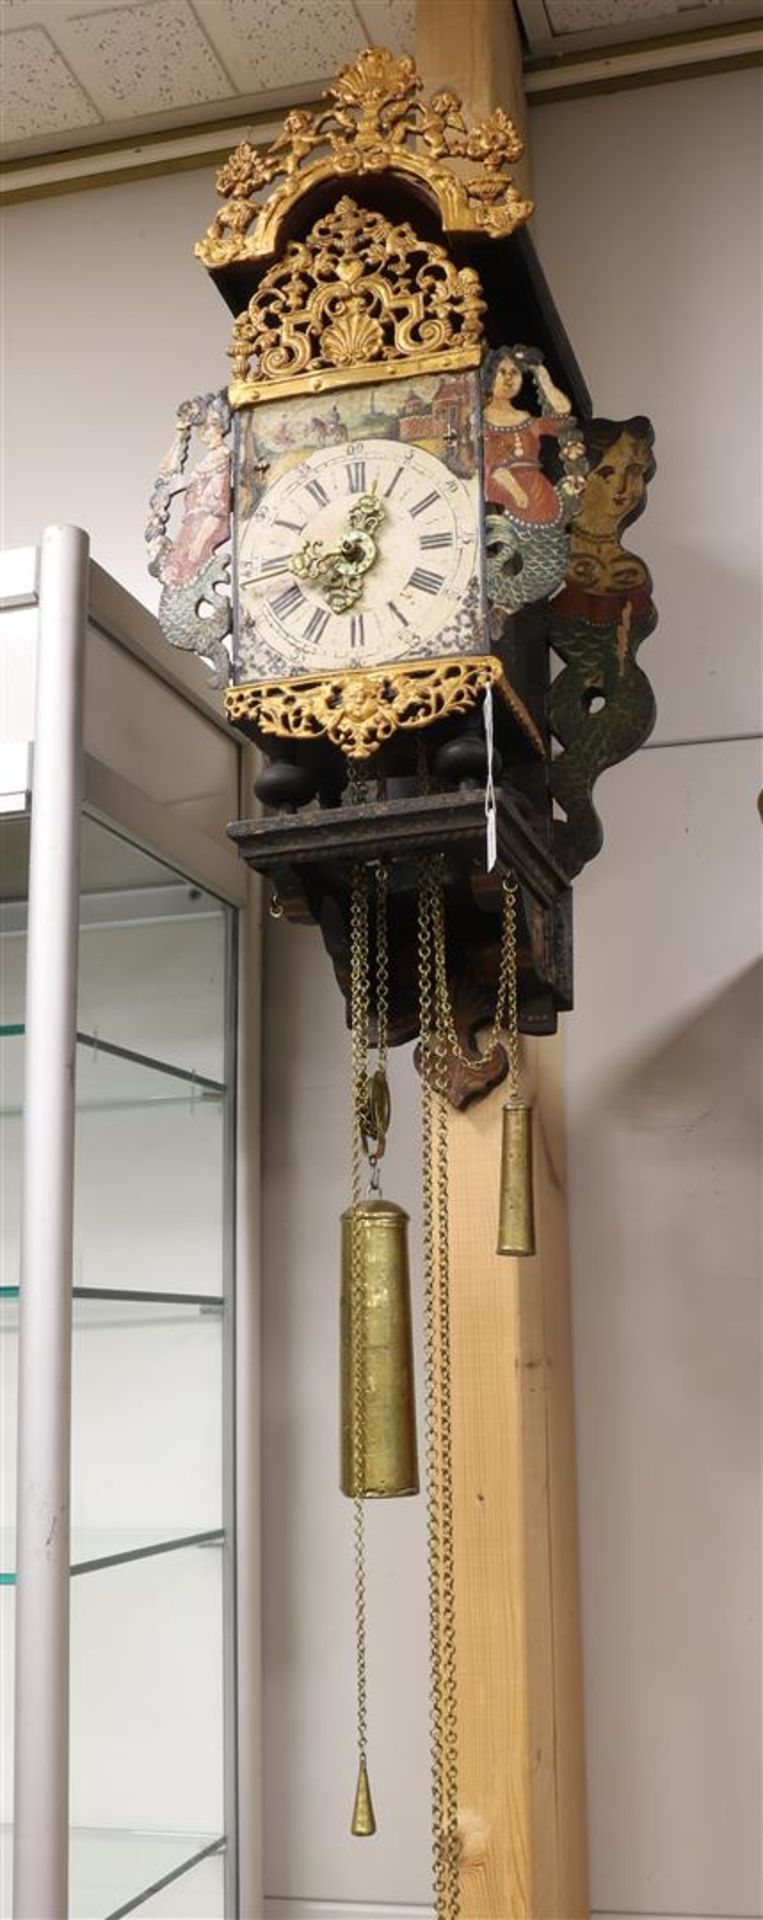 A chair clock, Friesland, 19th century. - Image 4 of 4